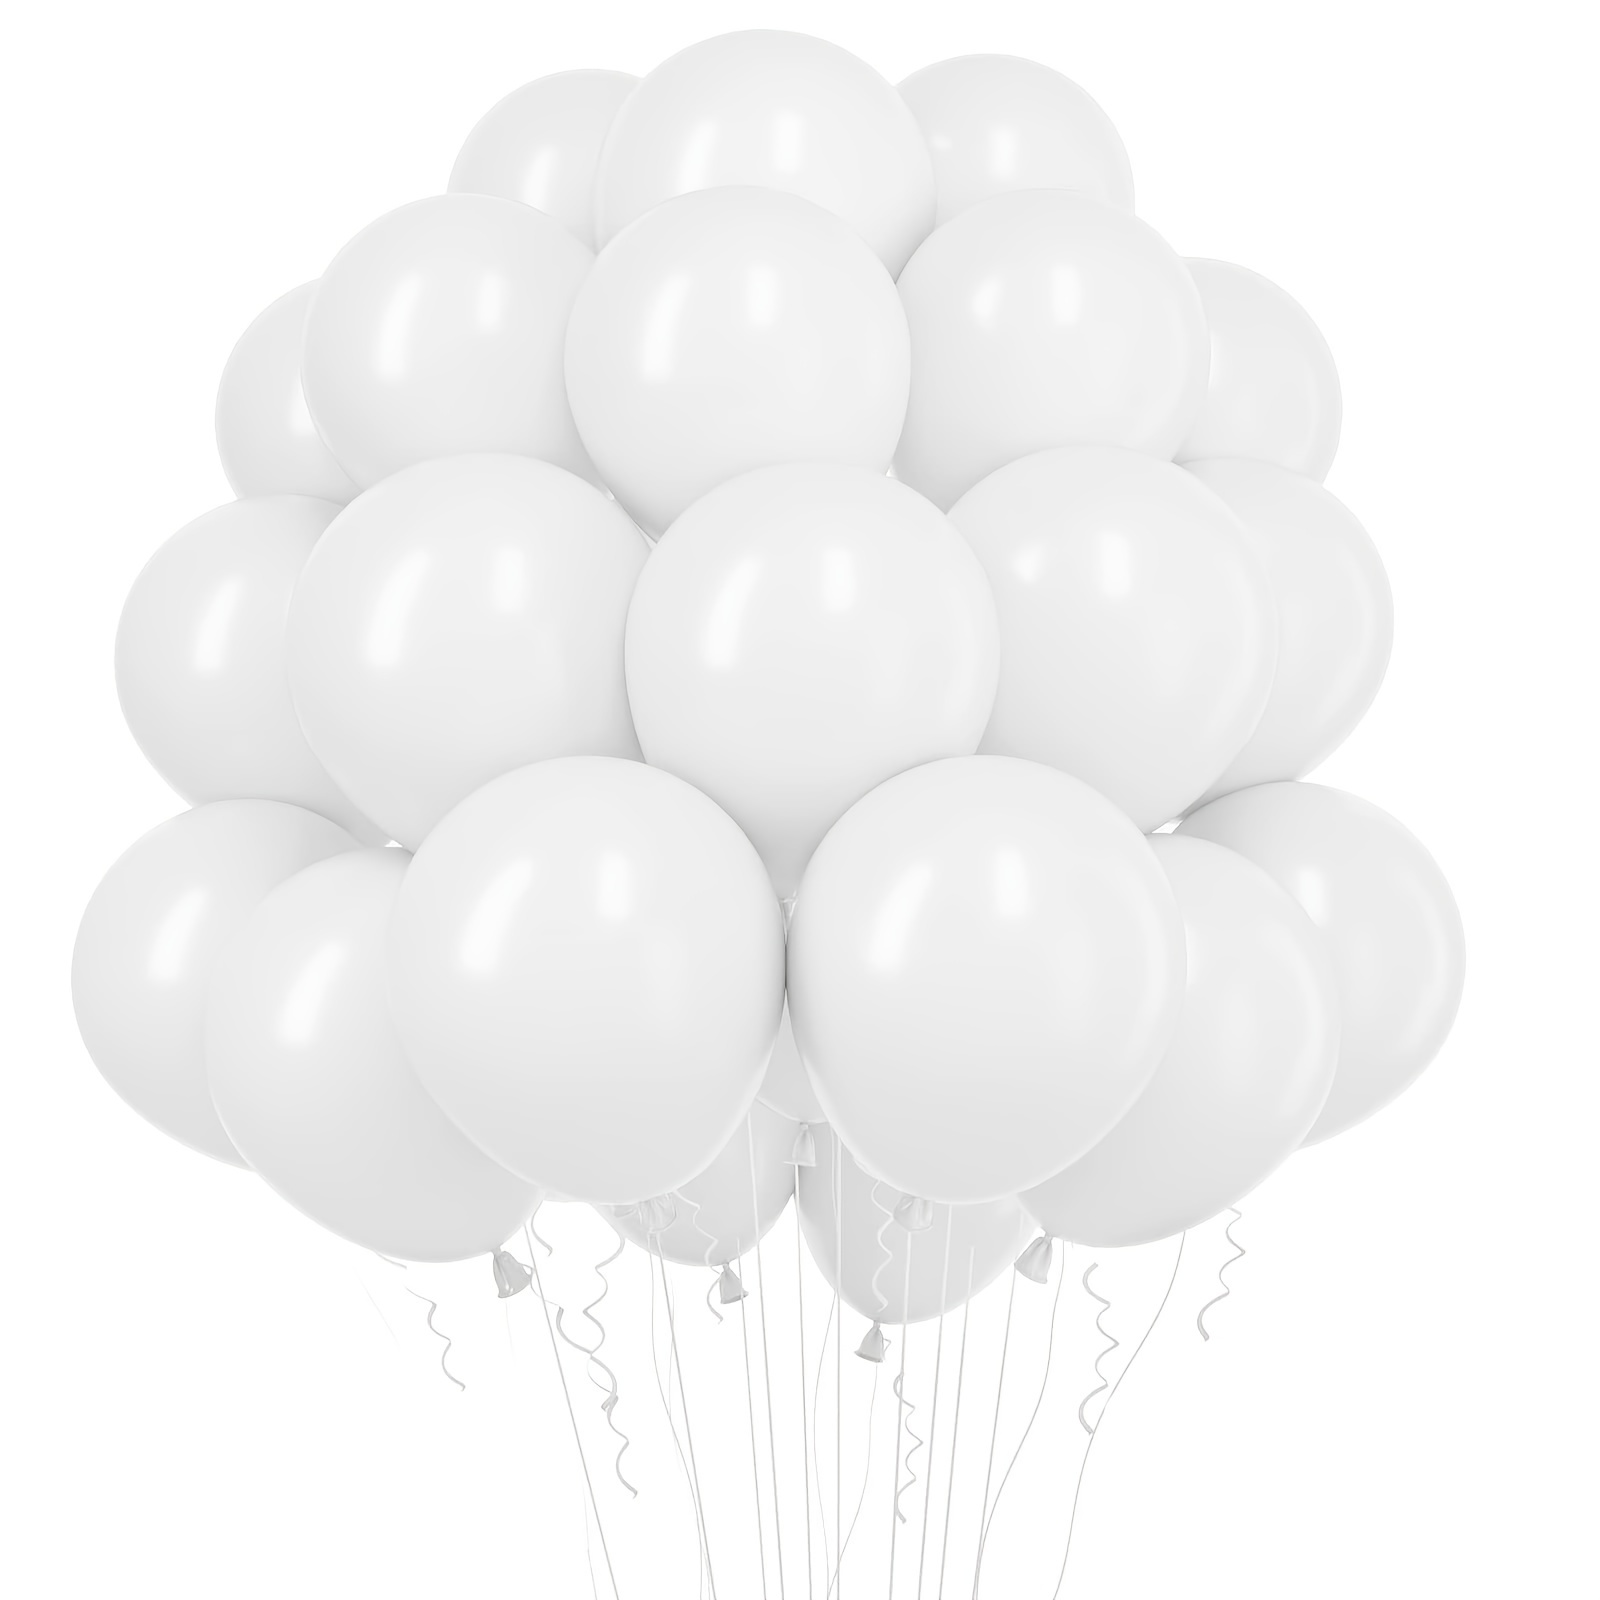 12pcs, Dove Balloons Memorial Release In Sky, White Angel Lanterns Funeral  Party Decorations For Loss Of Loved One, Celebration Of Life Favors, Happy  Birthday In Heaven Rip Supplies, High-quality & Affordable